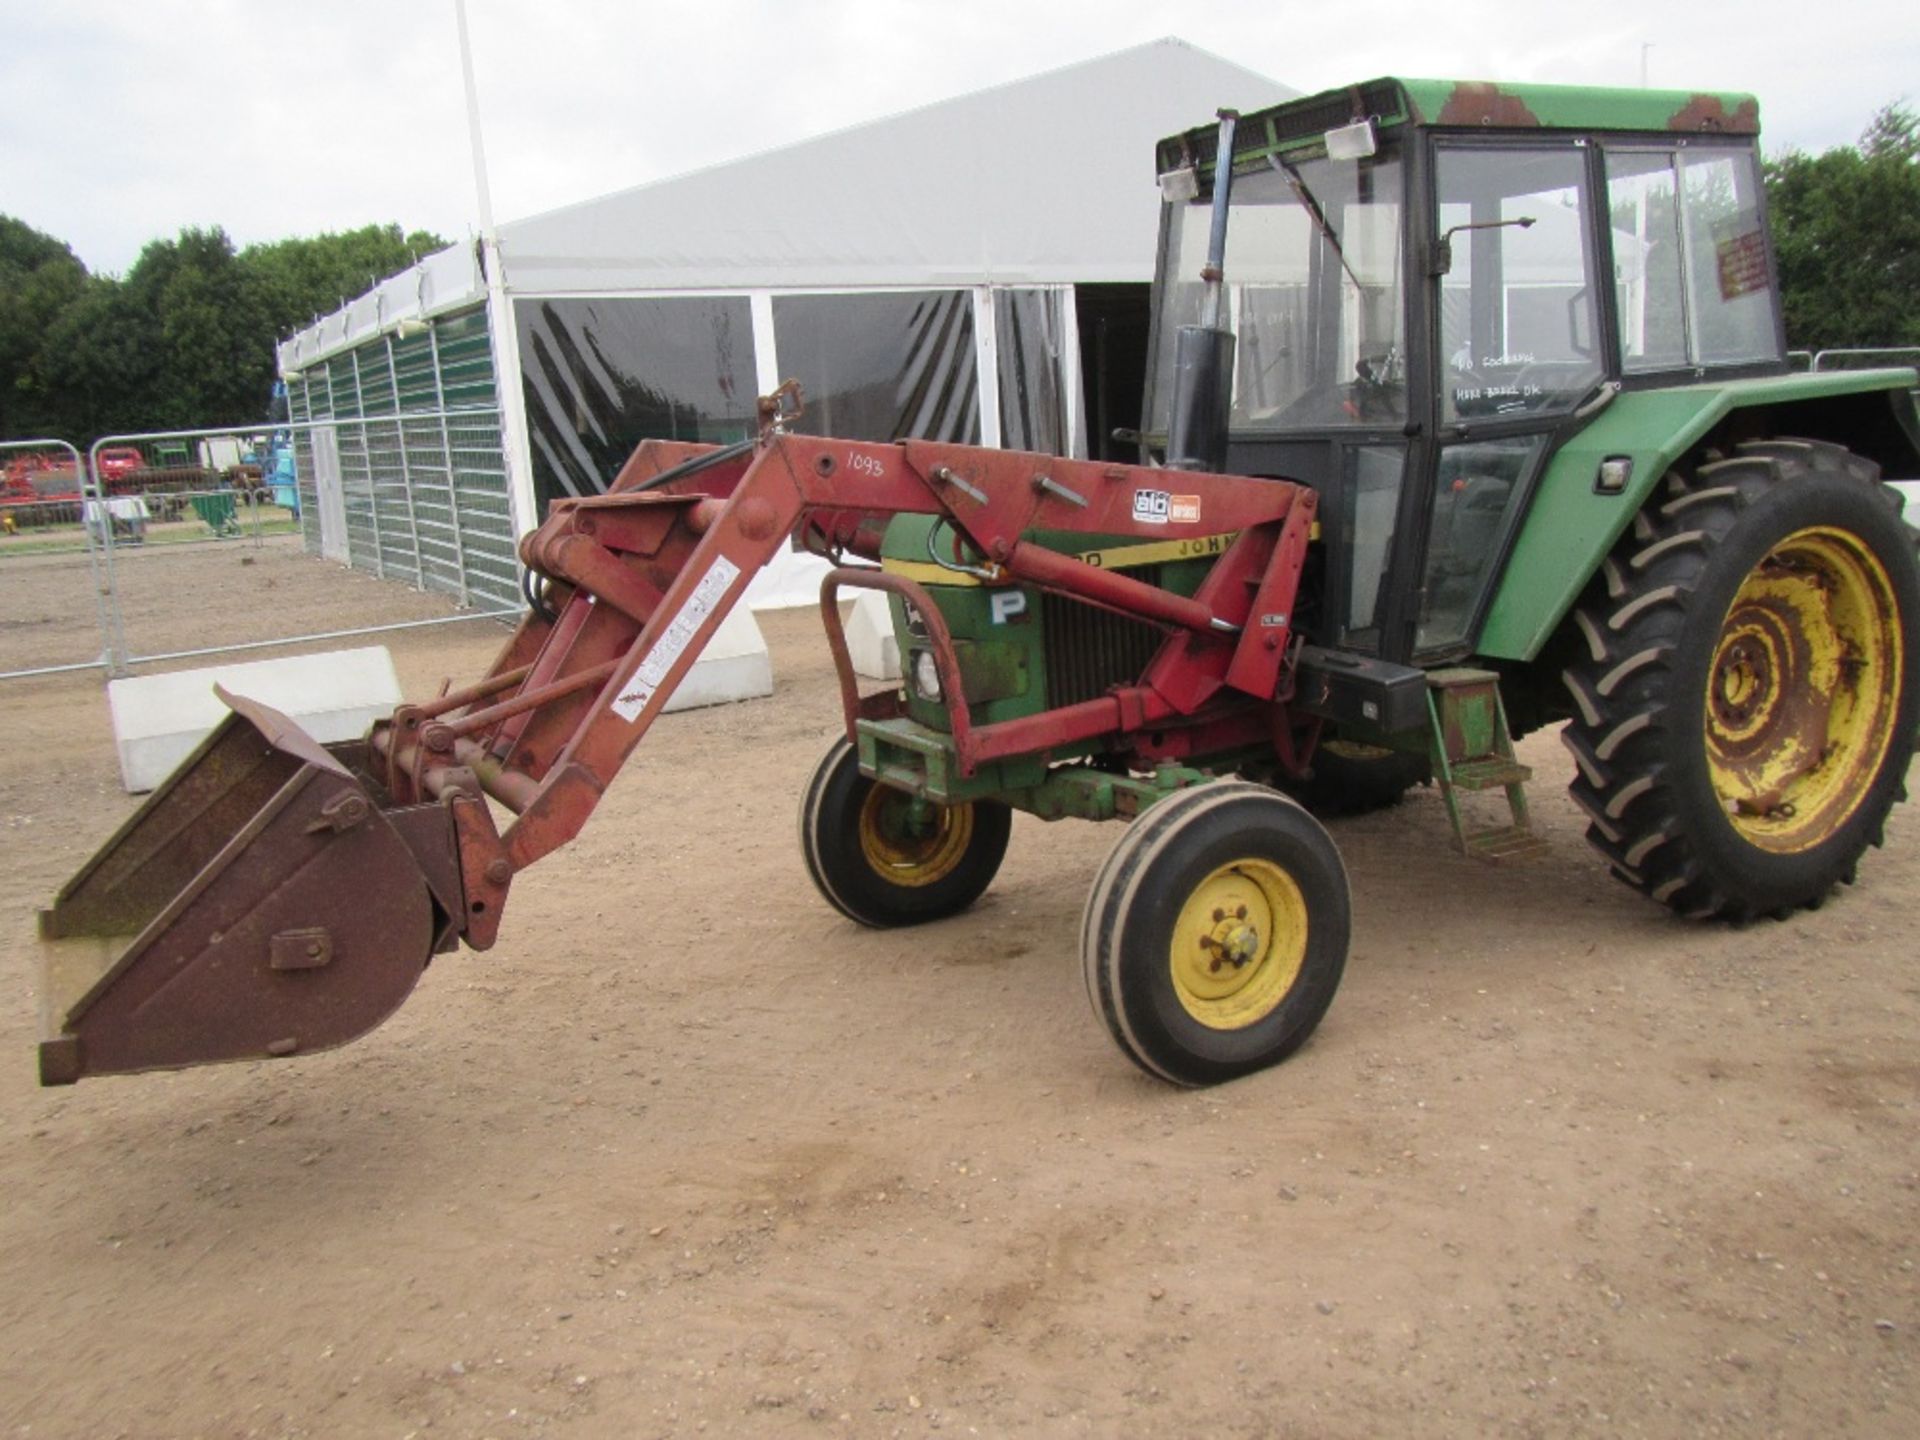 John Deere 3040 4wd Tractor. Subject to TOTAL LOSS INSURANCE CLAIM Reg. No. A122 VFE